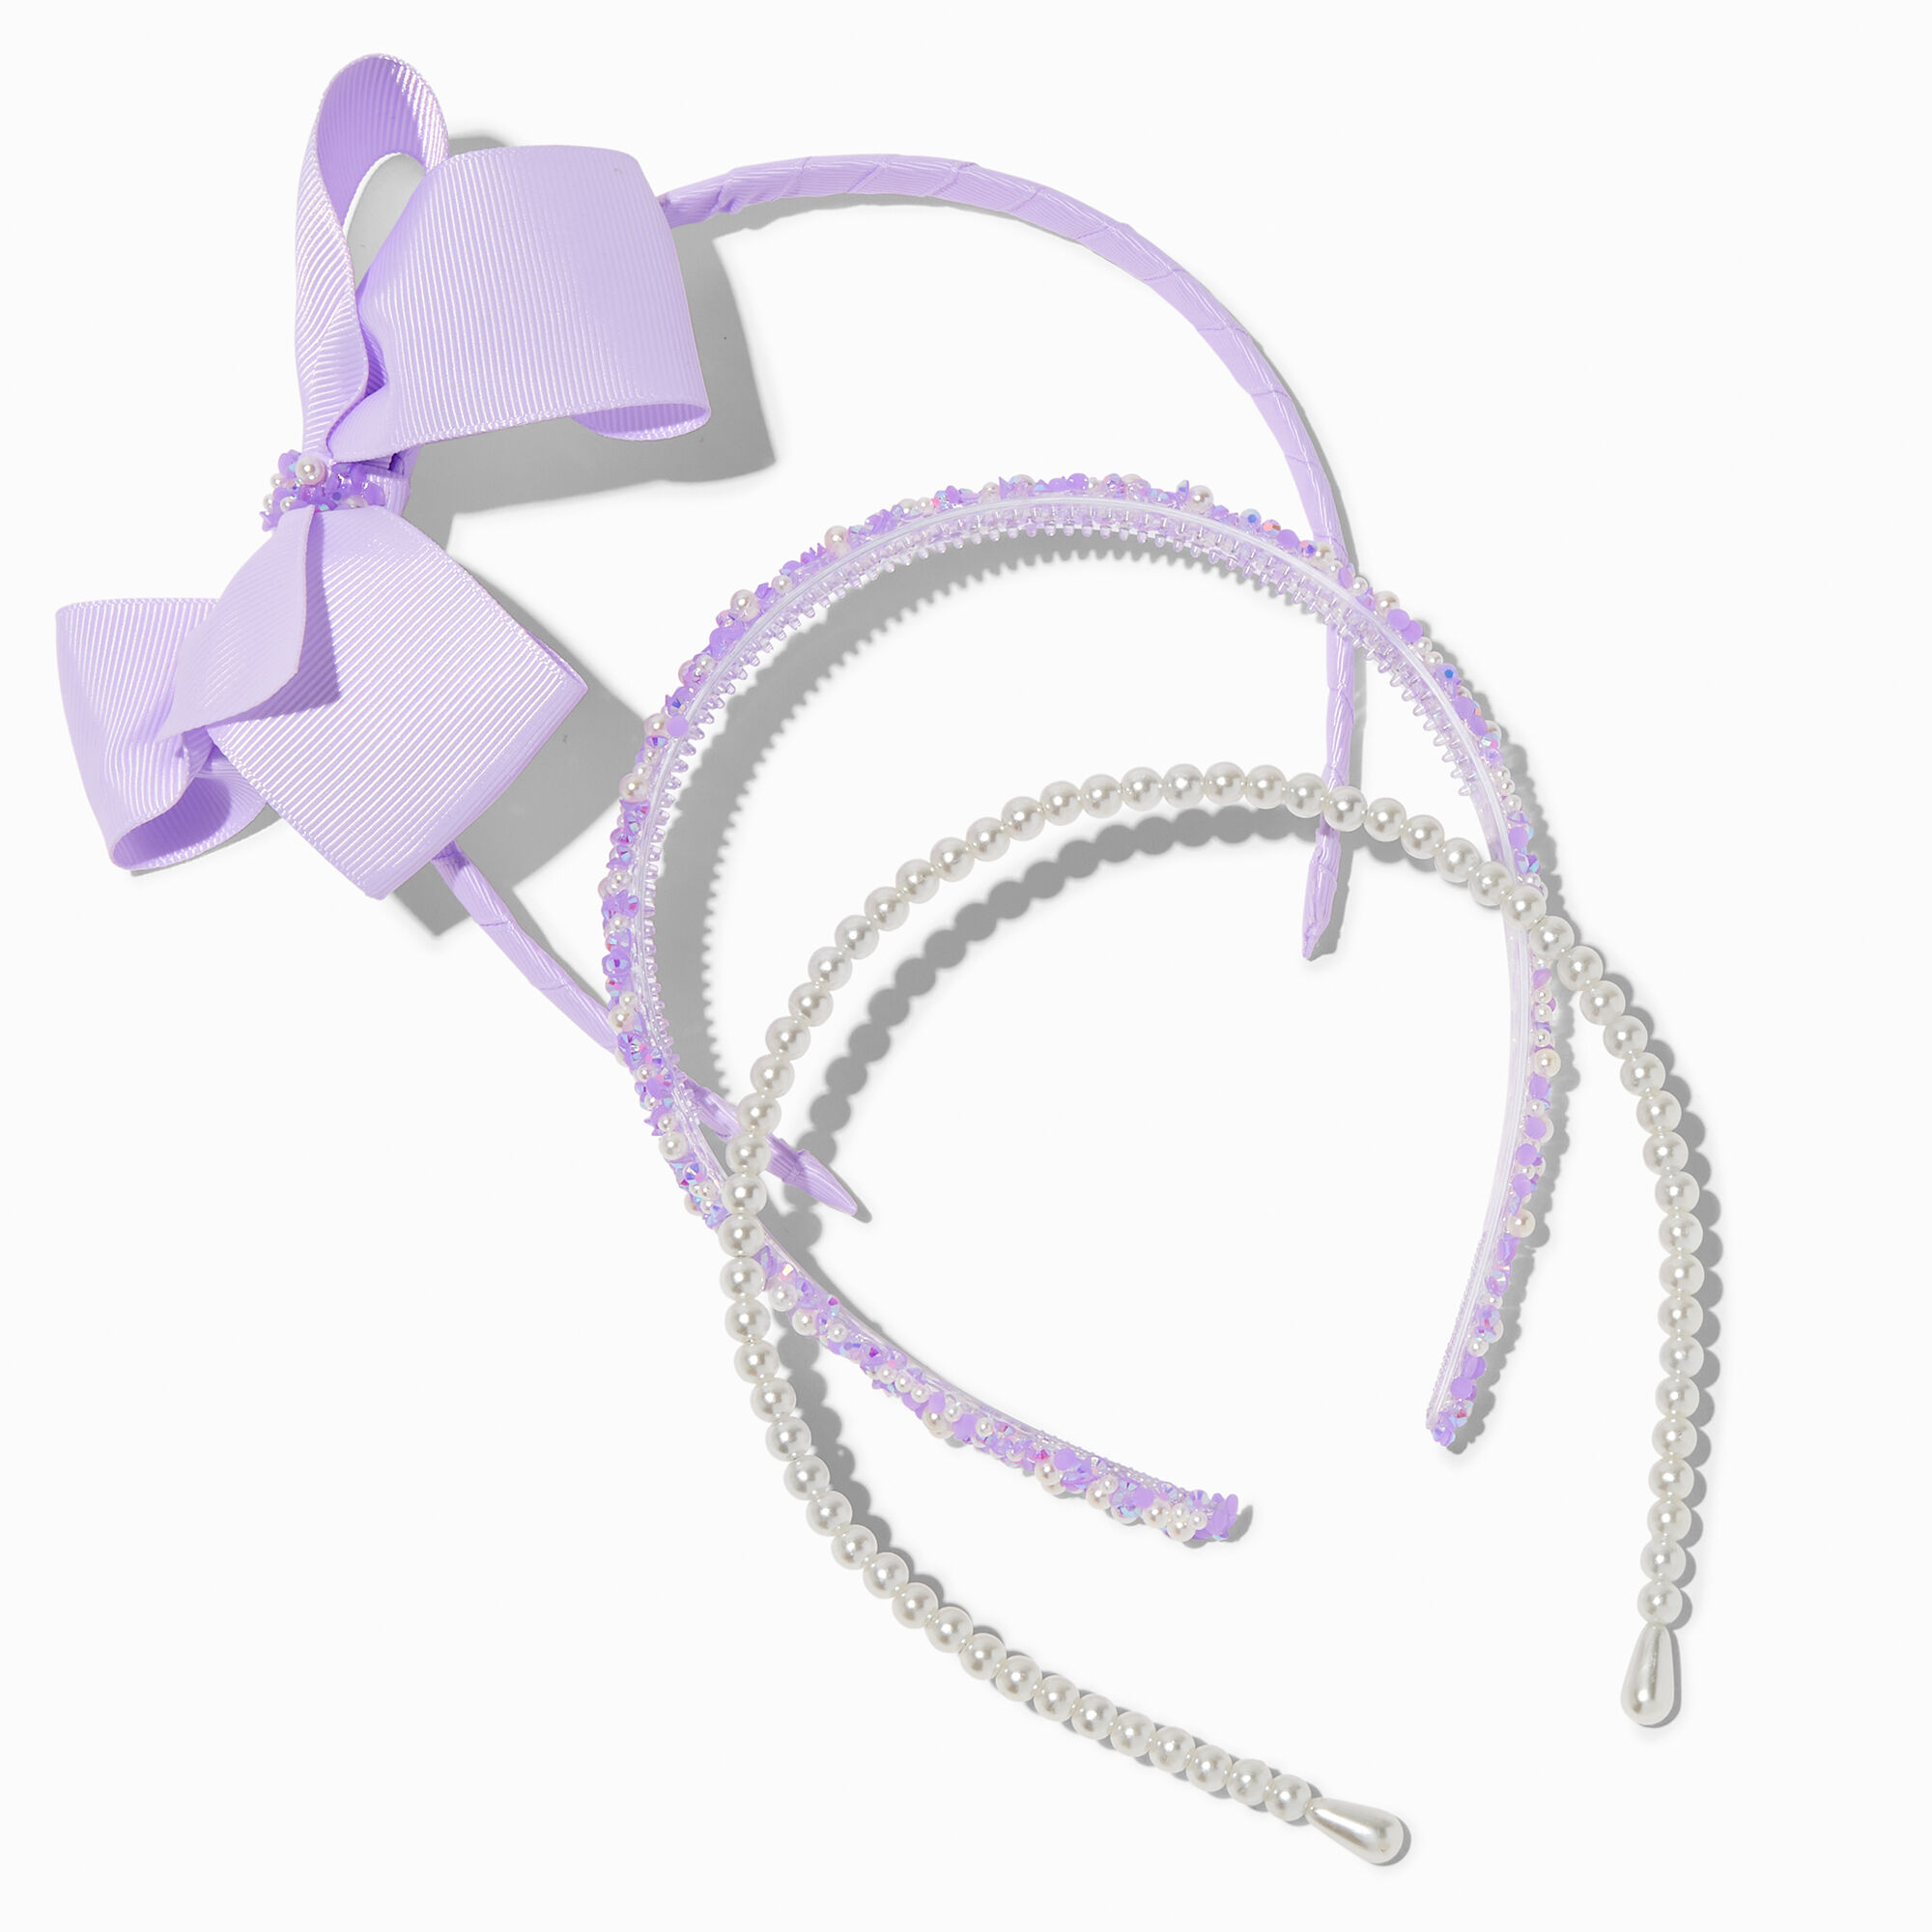 View Claires Club Mermaid Bling Pearl Loopy Bow Headbands 3 Pack information